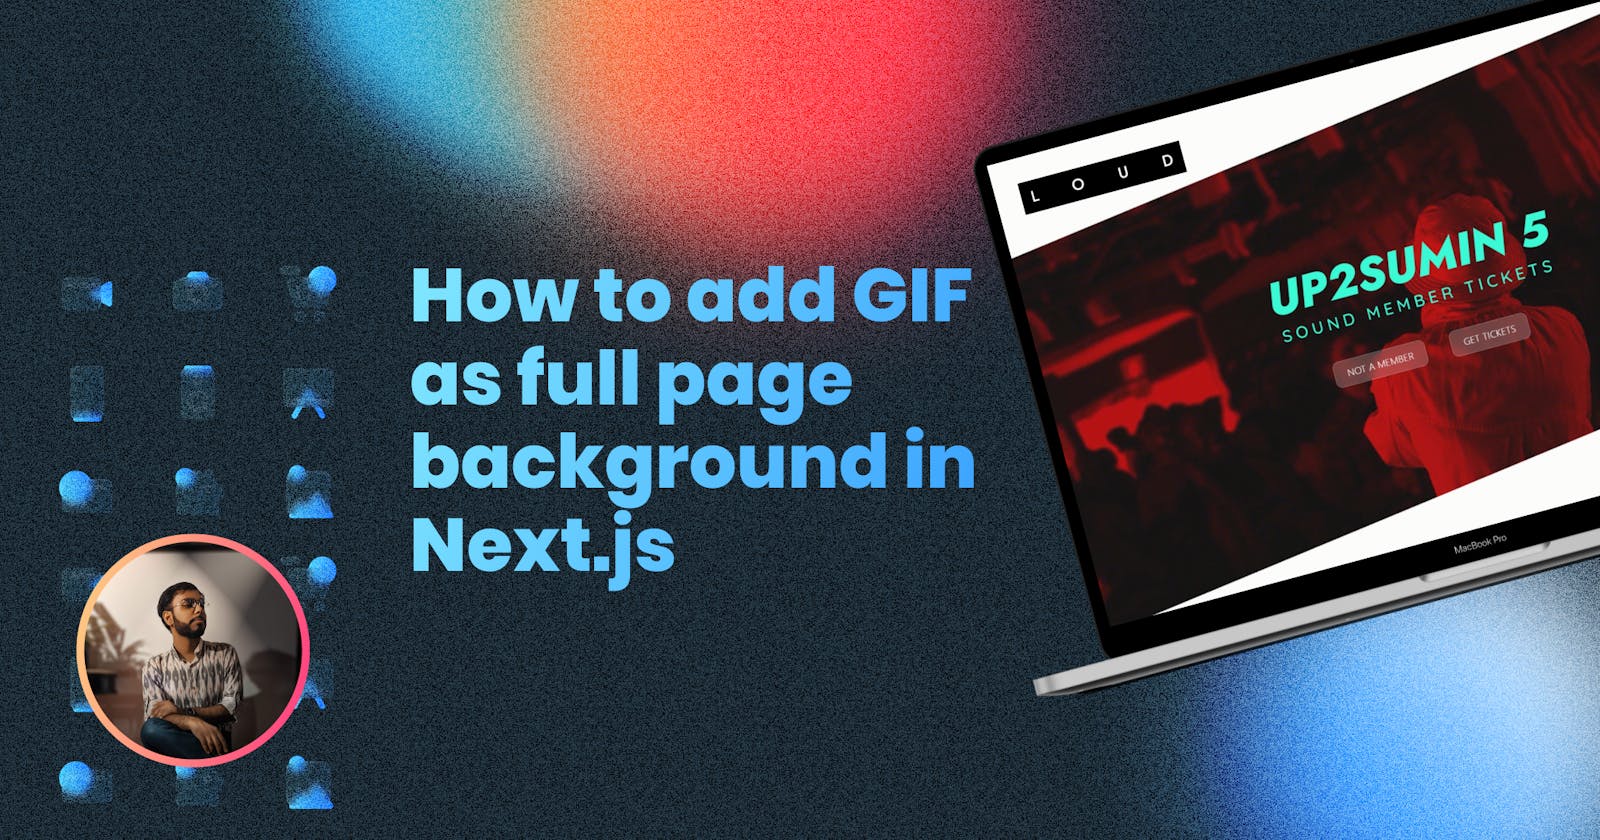 How to add GIF as full page background in 
Next.js